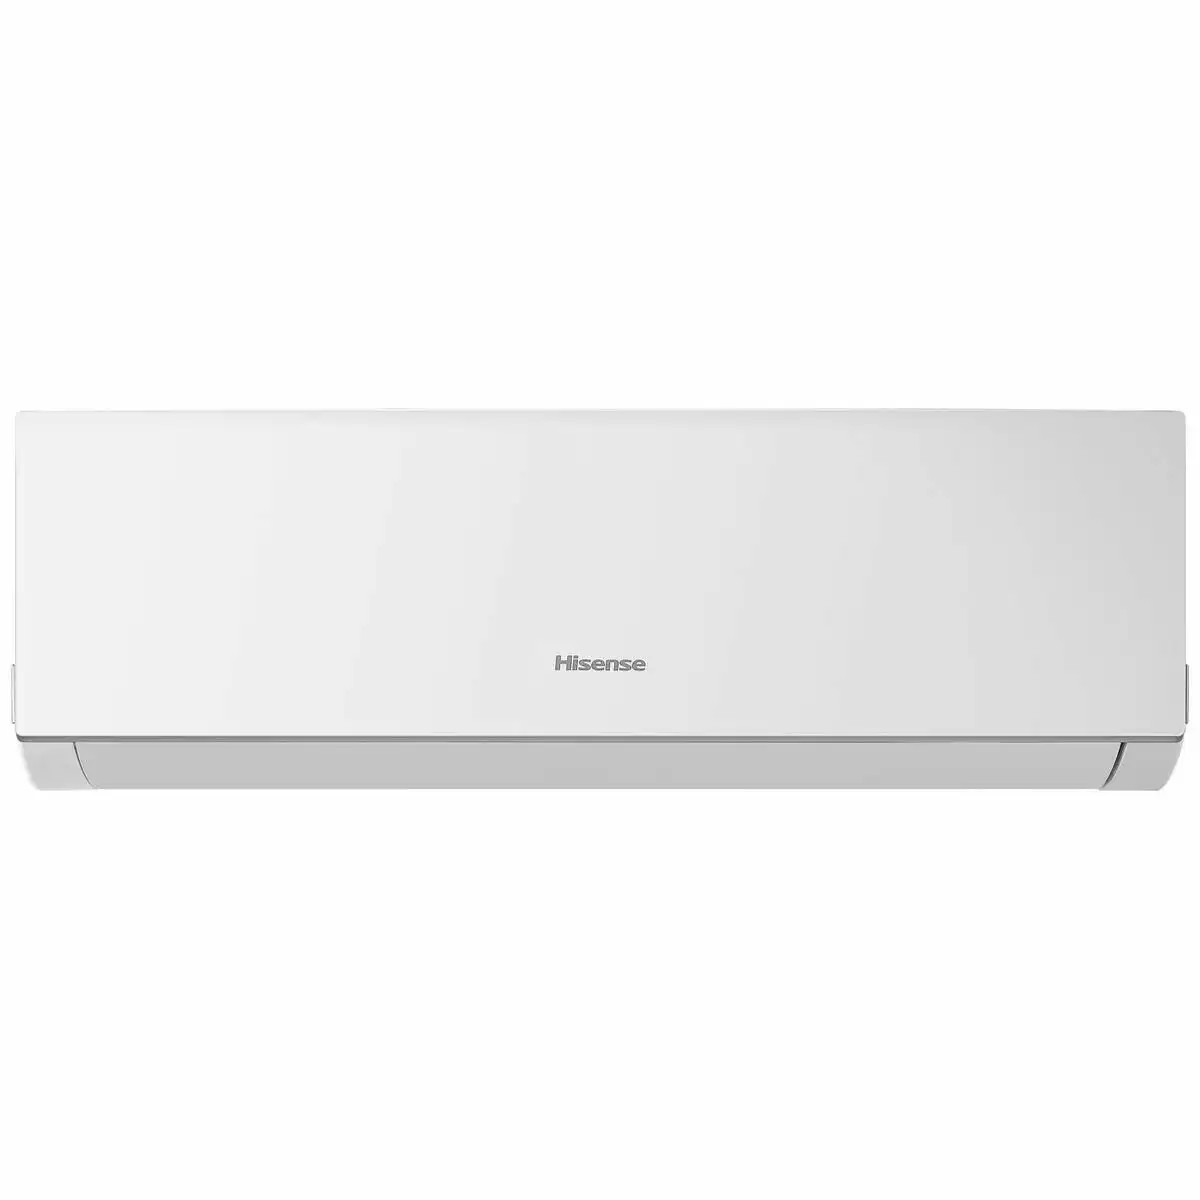 Hisense 9.0kw Reverse Cycle Air Conditioner